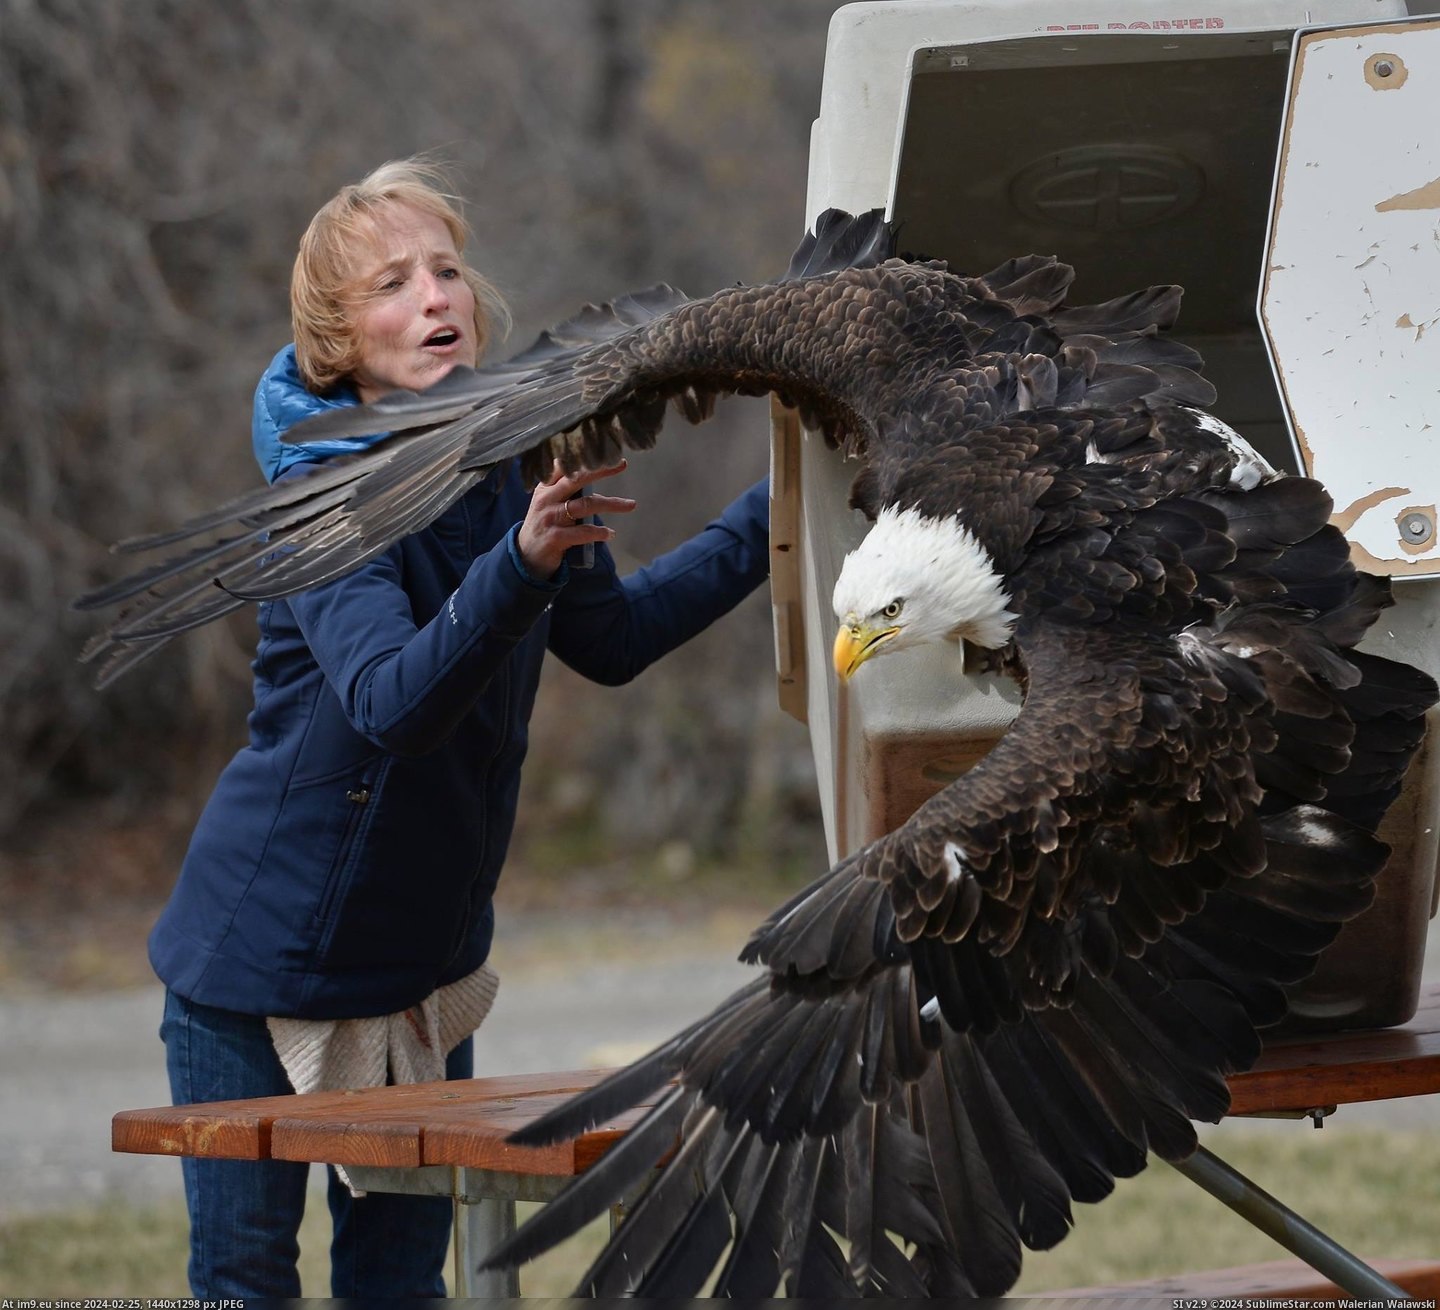 #Trap #Caught #Center #Released #Conservation #Montana #Eagle #Bald [Pics] This bald eagle was found caught in a trap and rehabilitated by the Montana Raptor Conservation Center. It was released b Pic. (Obraz z album My r/PICS favs))